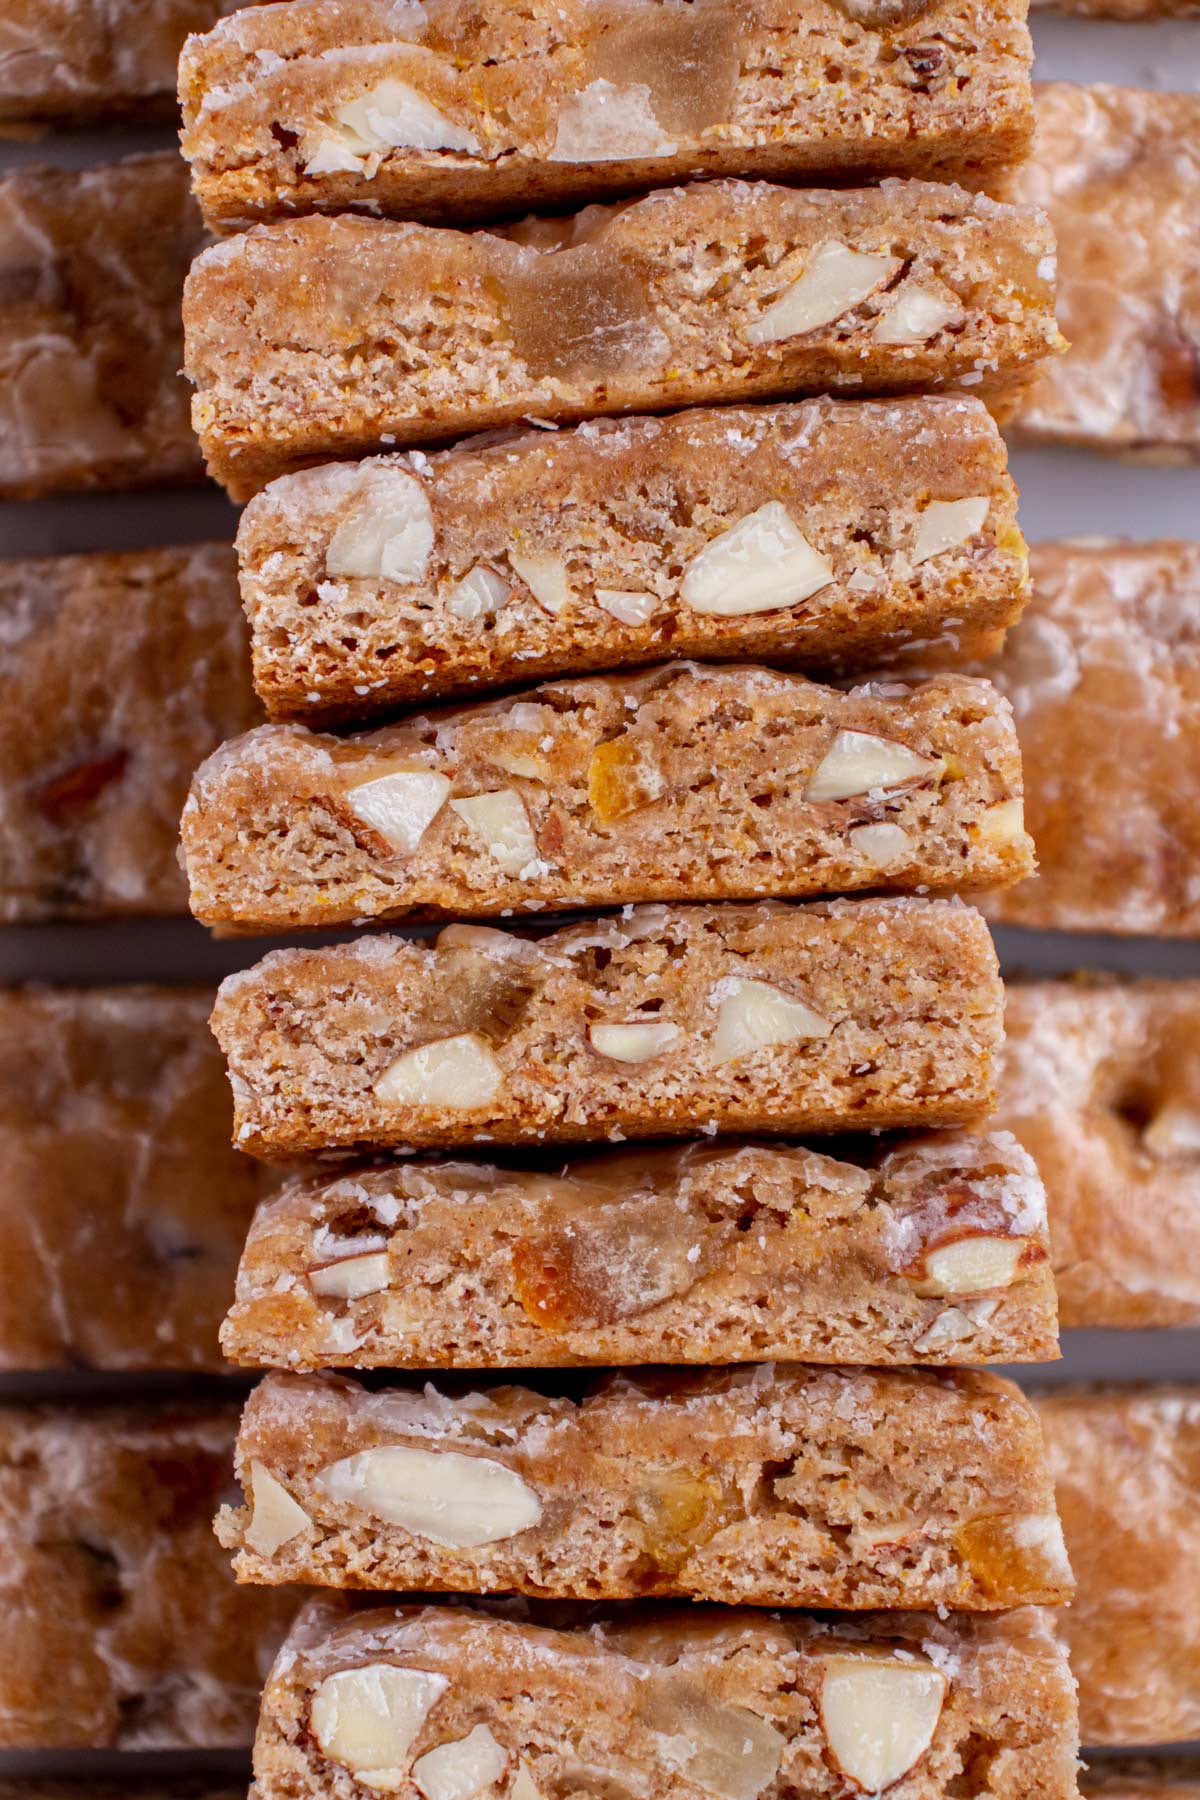 Closeup of a row of leckerli showing the cross-section of nuts and candied citrus peel.